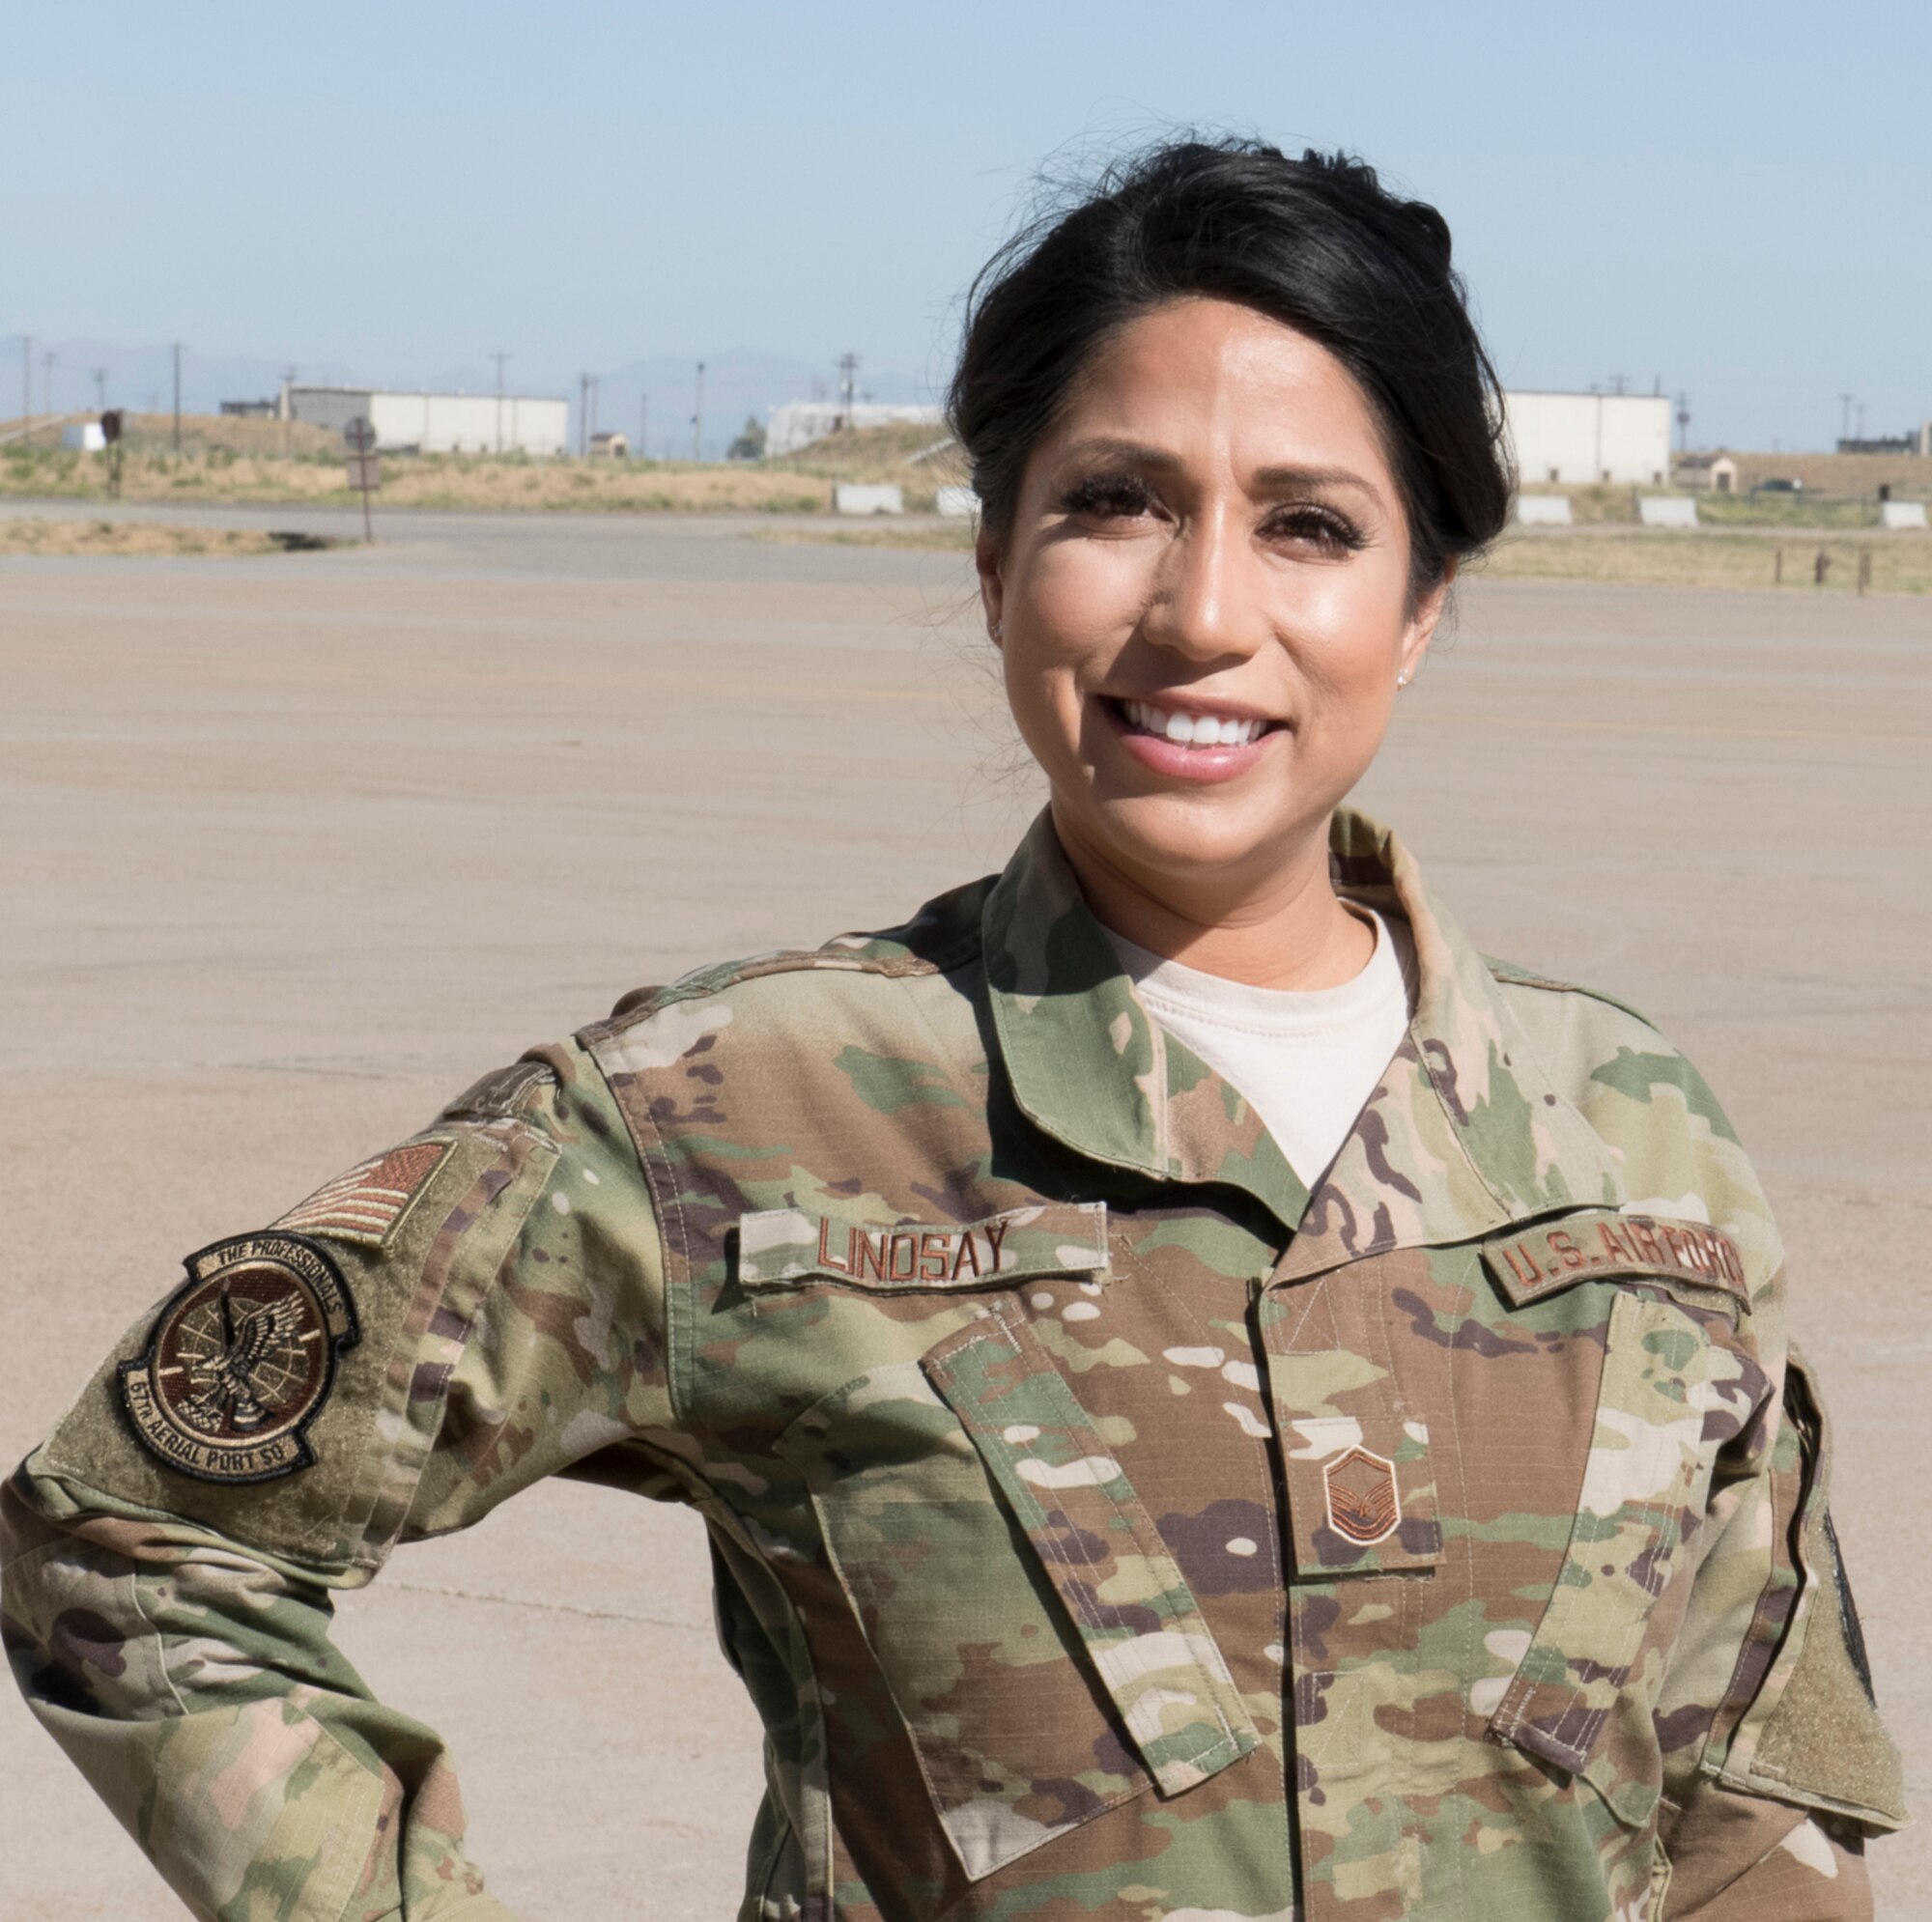 Master Sgt. Janet Lindsay, special handling supervisor in the 67th Aerial Port Squadron